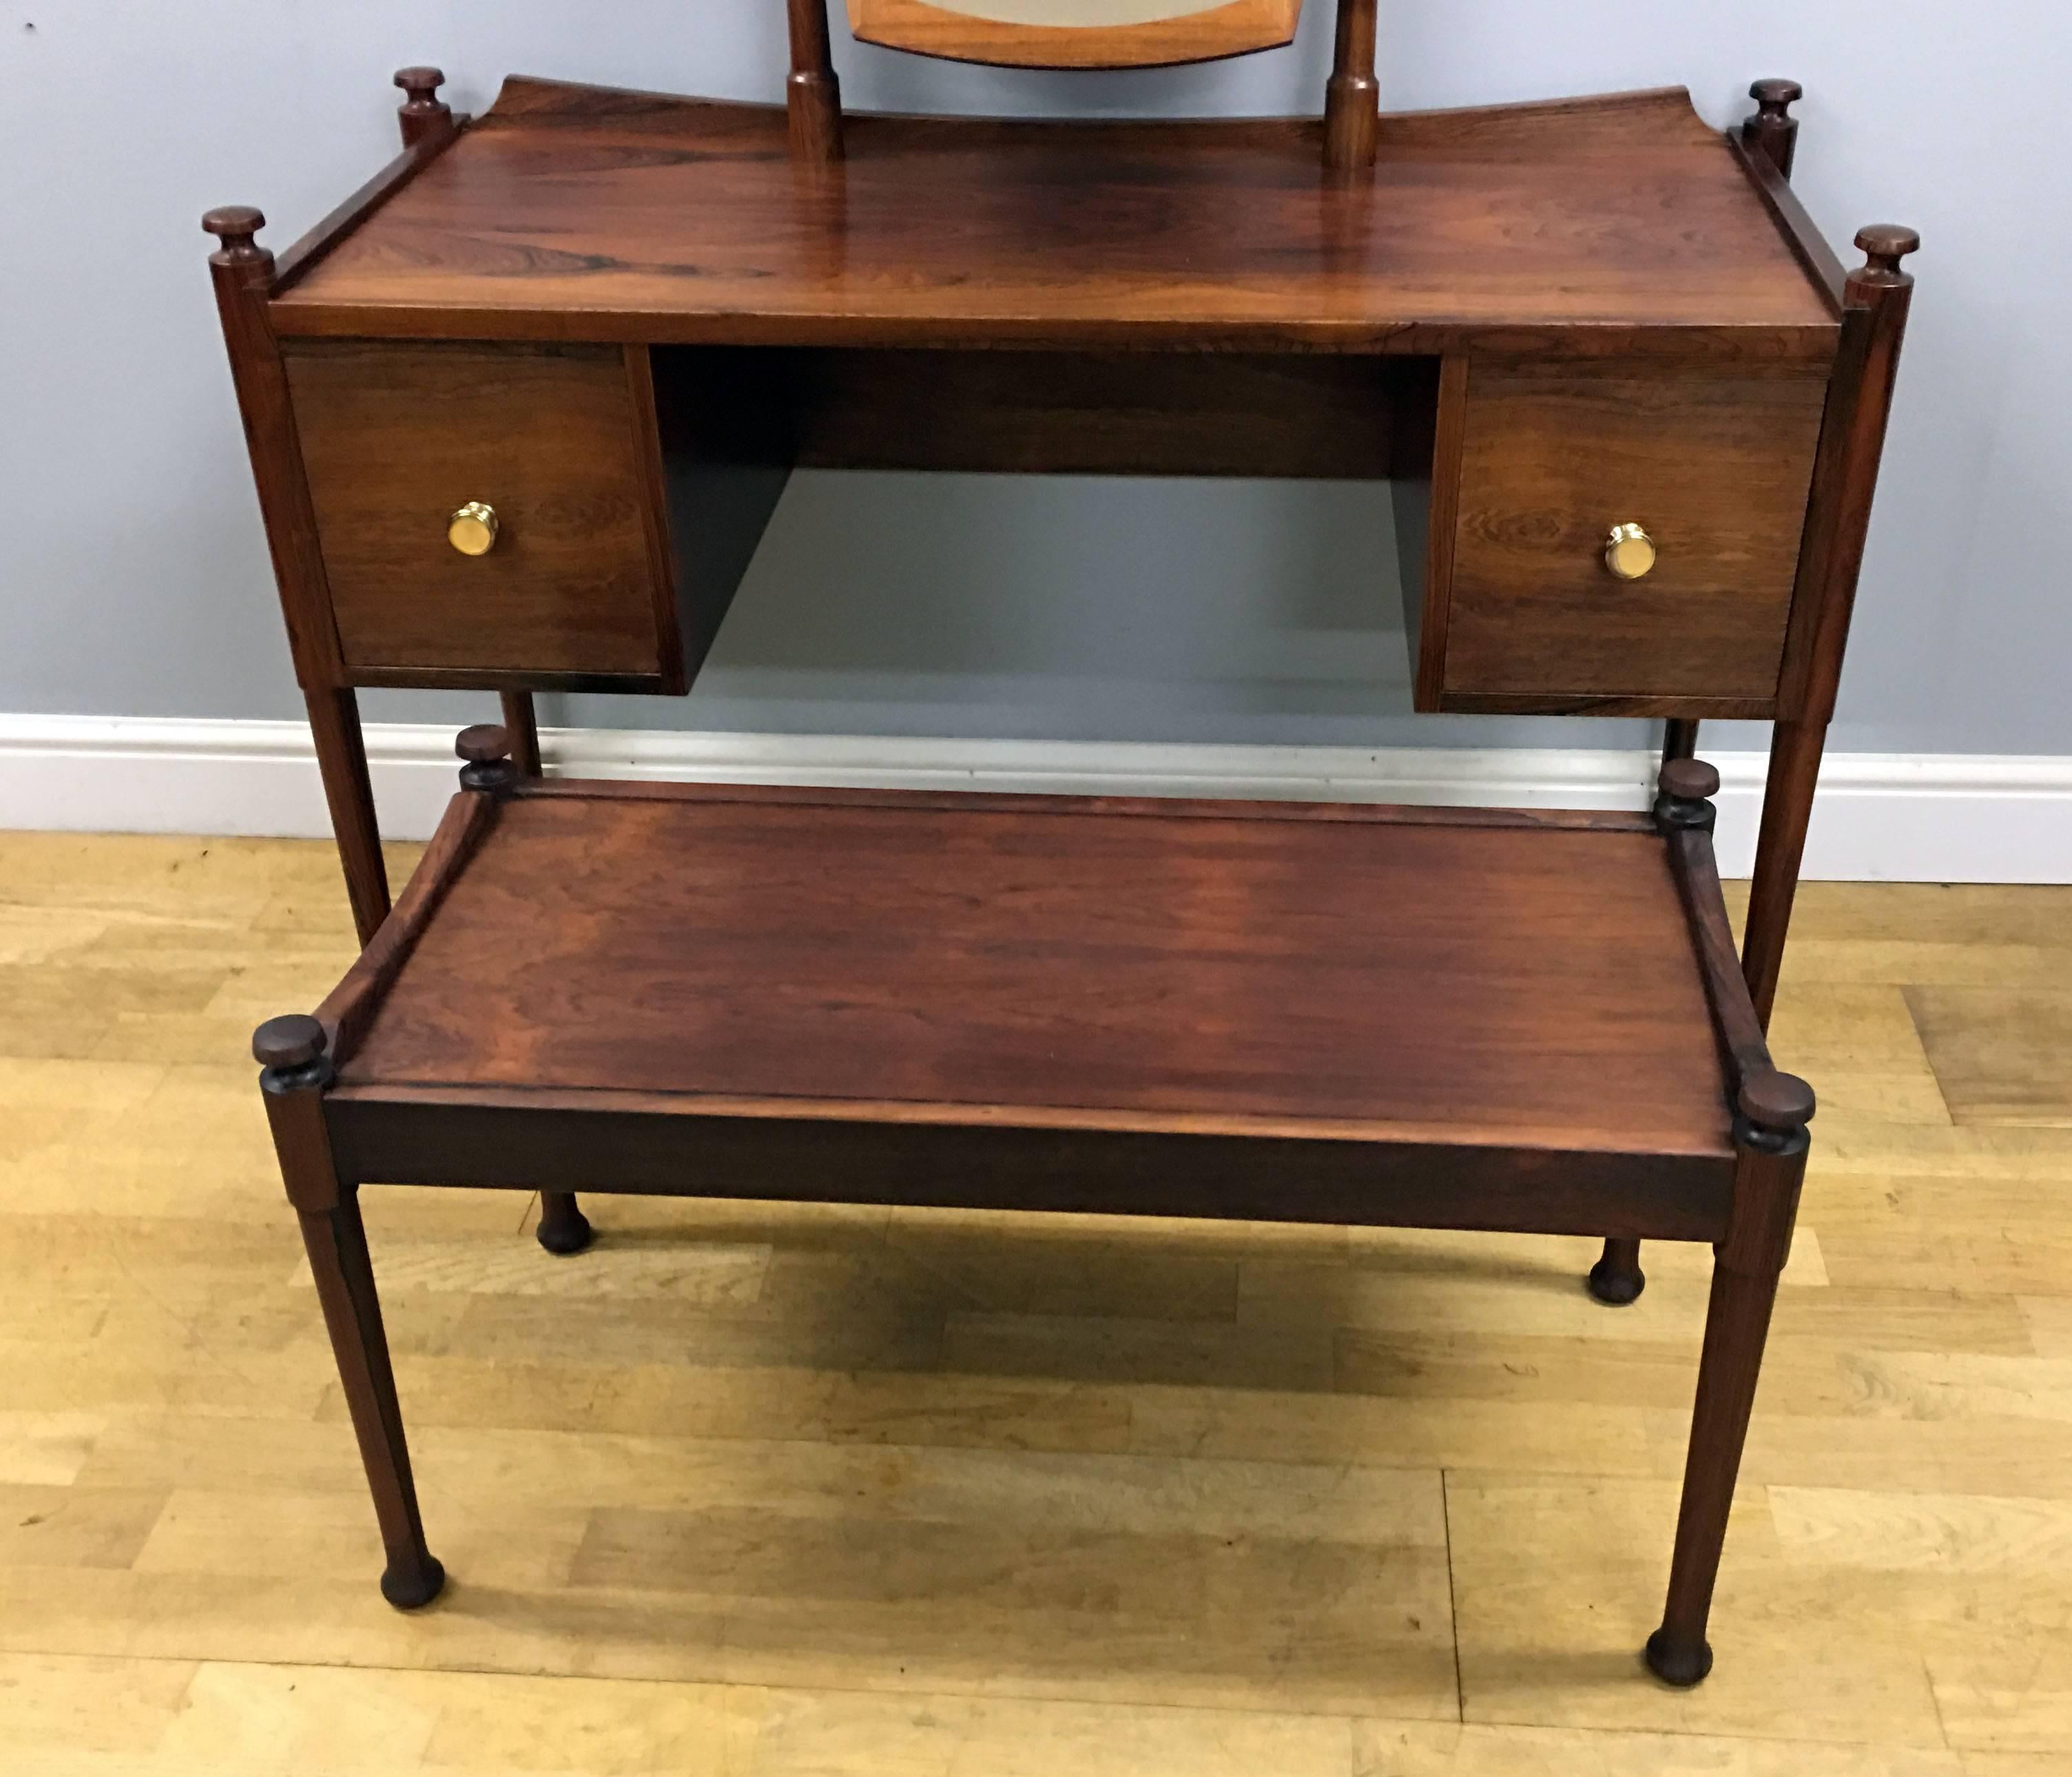 A very nice rosewood dressing or vanity table with matching long stool with loose sheepskin cover. The table with two drawers with brass handles and a swing mirror, and all in great condition.
Dimensions are 
table overall
height 120cm (with